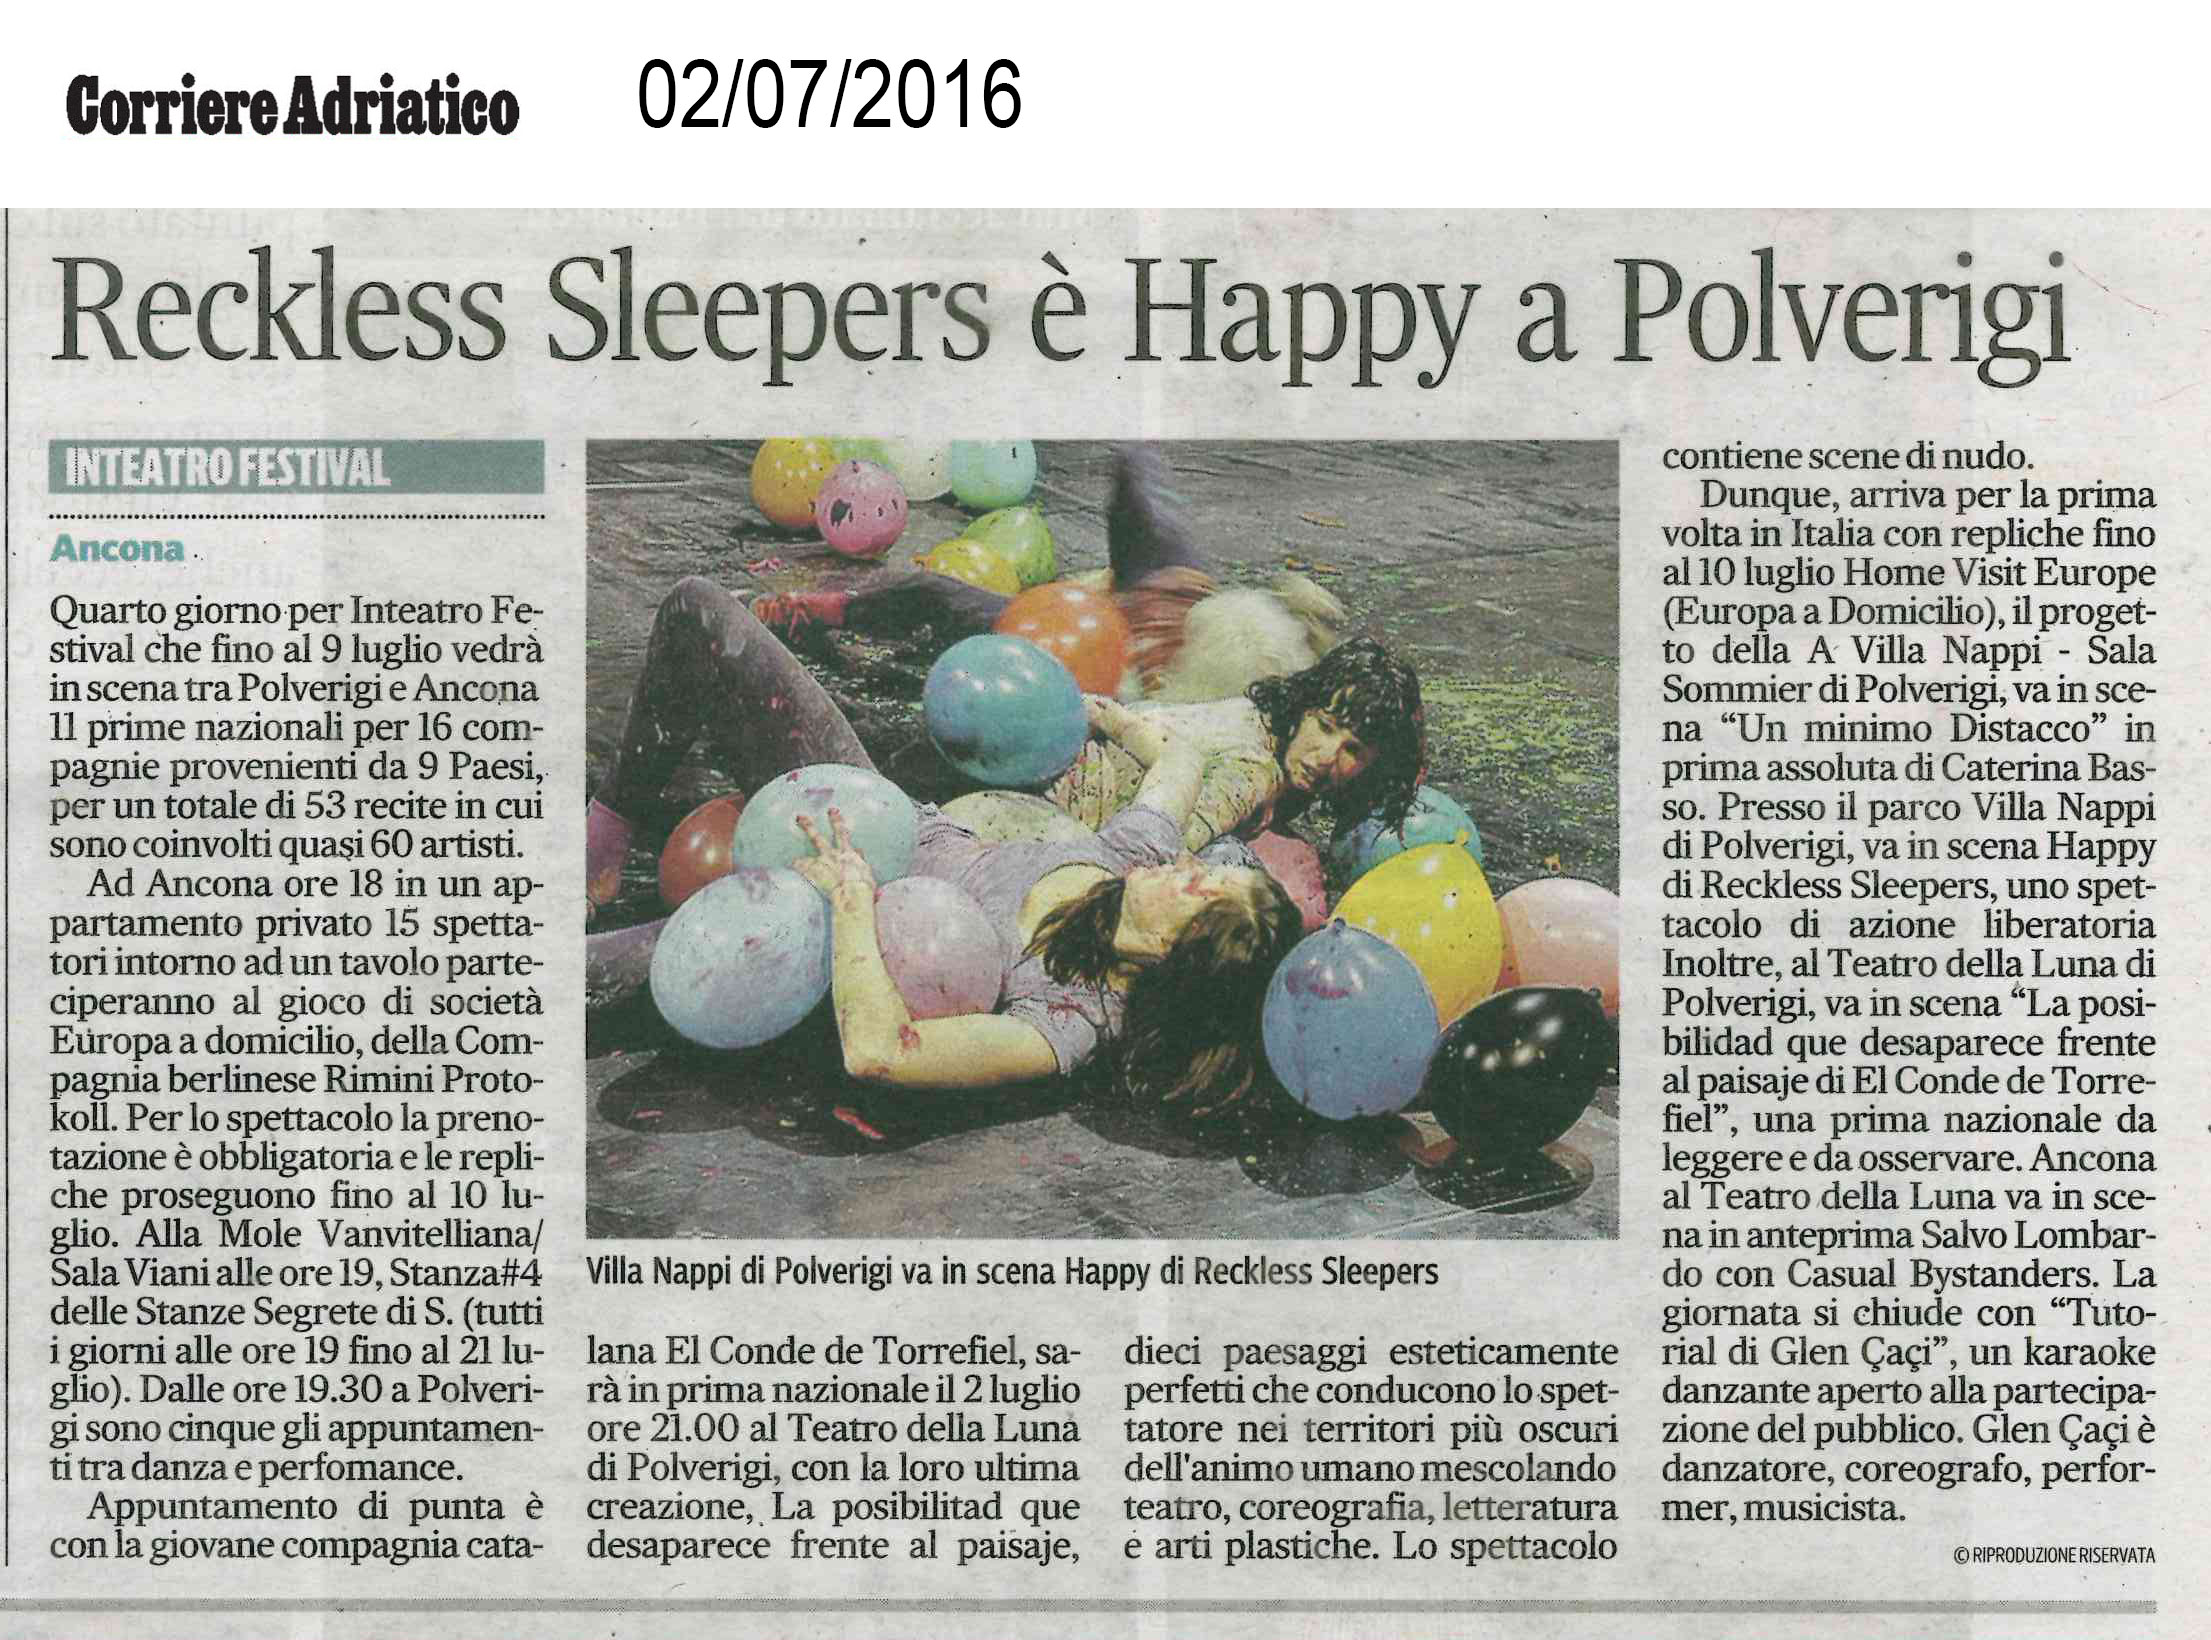 2016_07_02_-reckless-sleepers-è-happy-a-polverici_corriere-adriatico